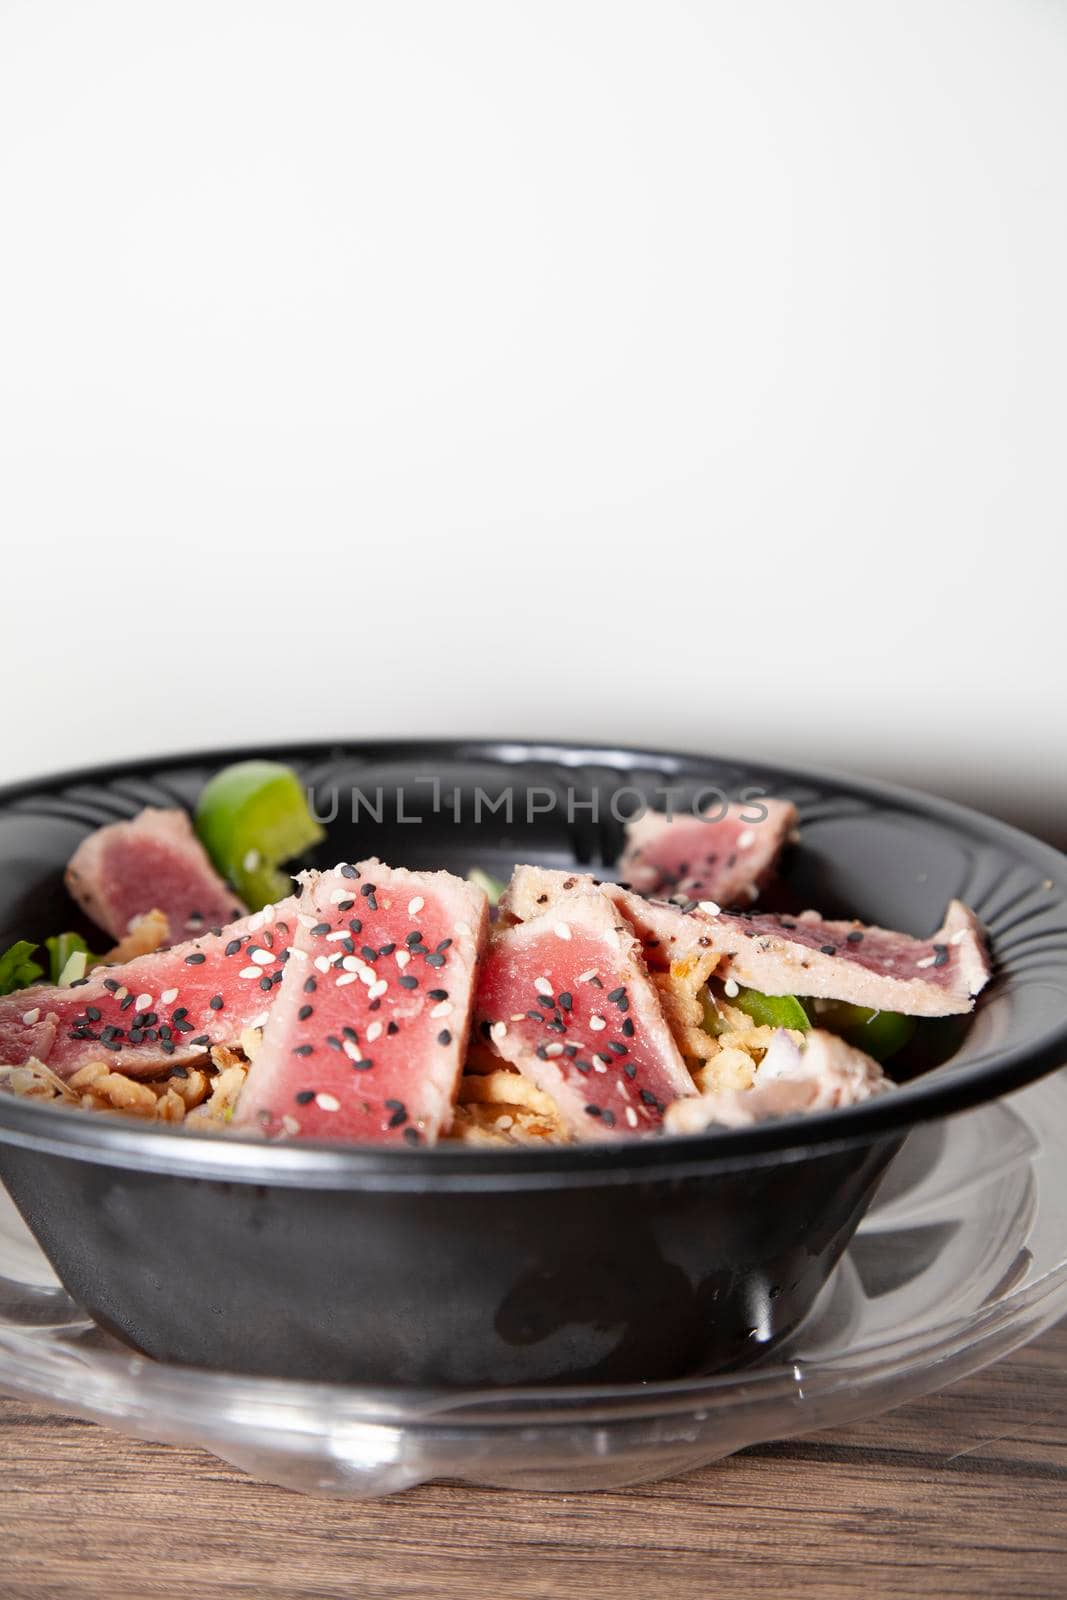 Seared tuna salad with lettuce, sliced green bell pepper, and red onion on a wooden table 